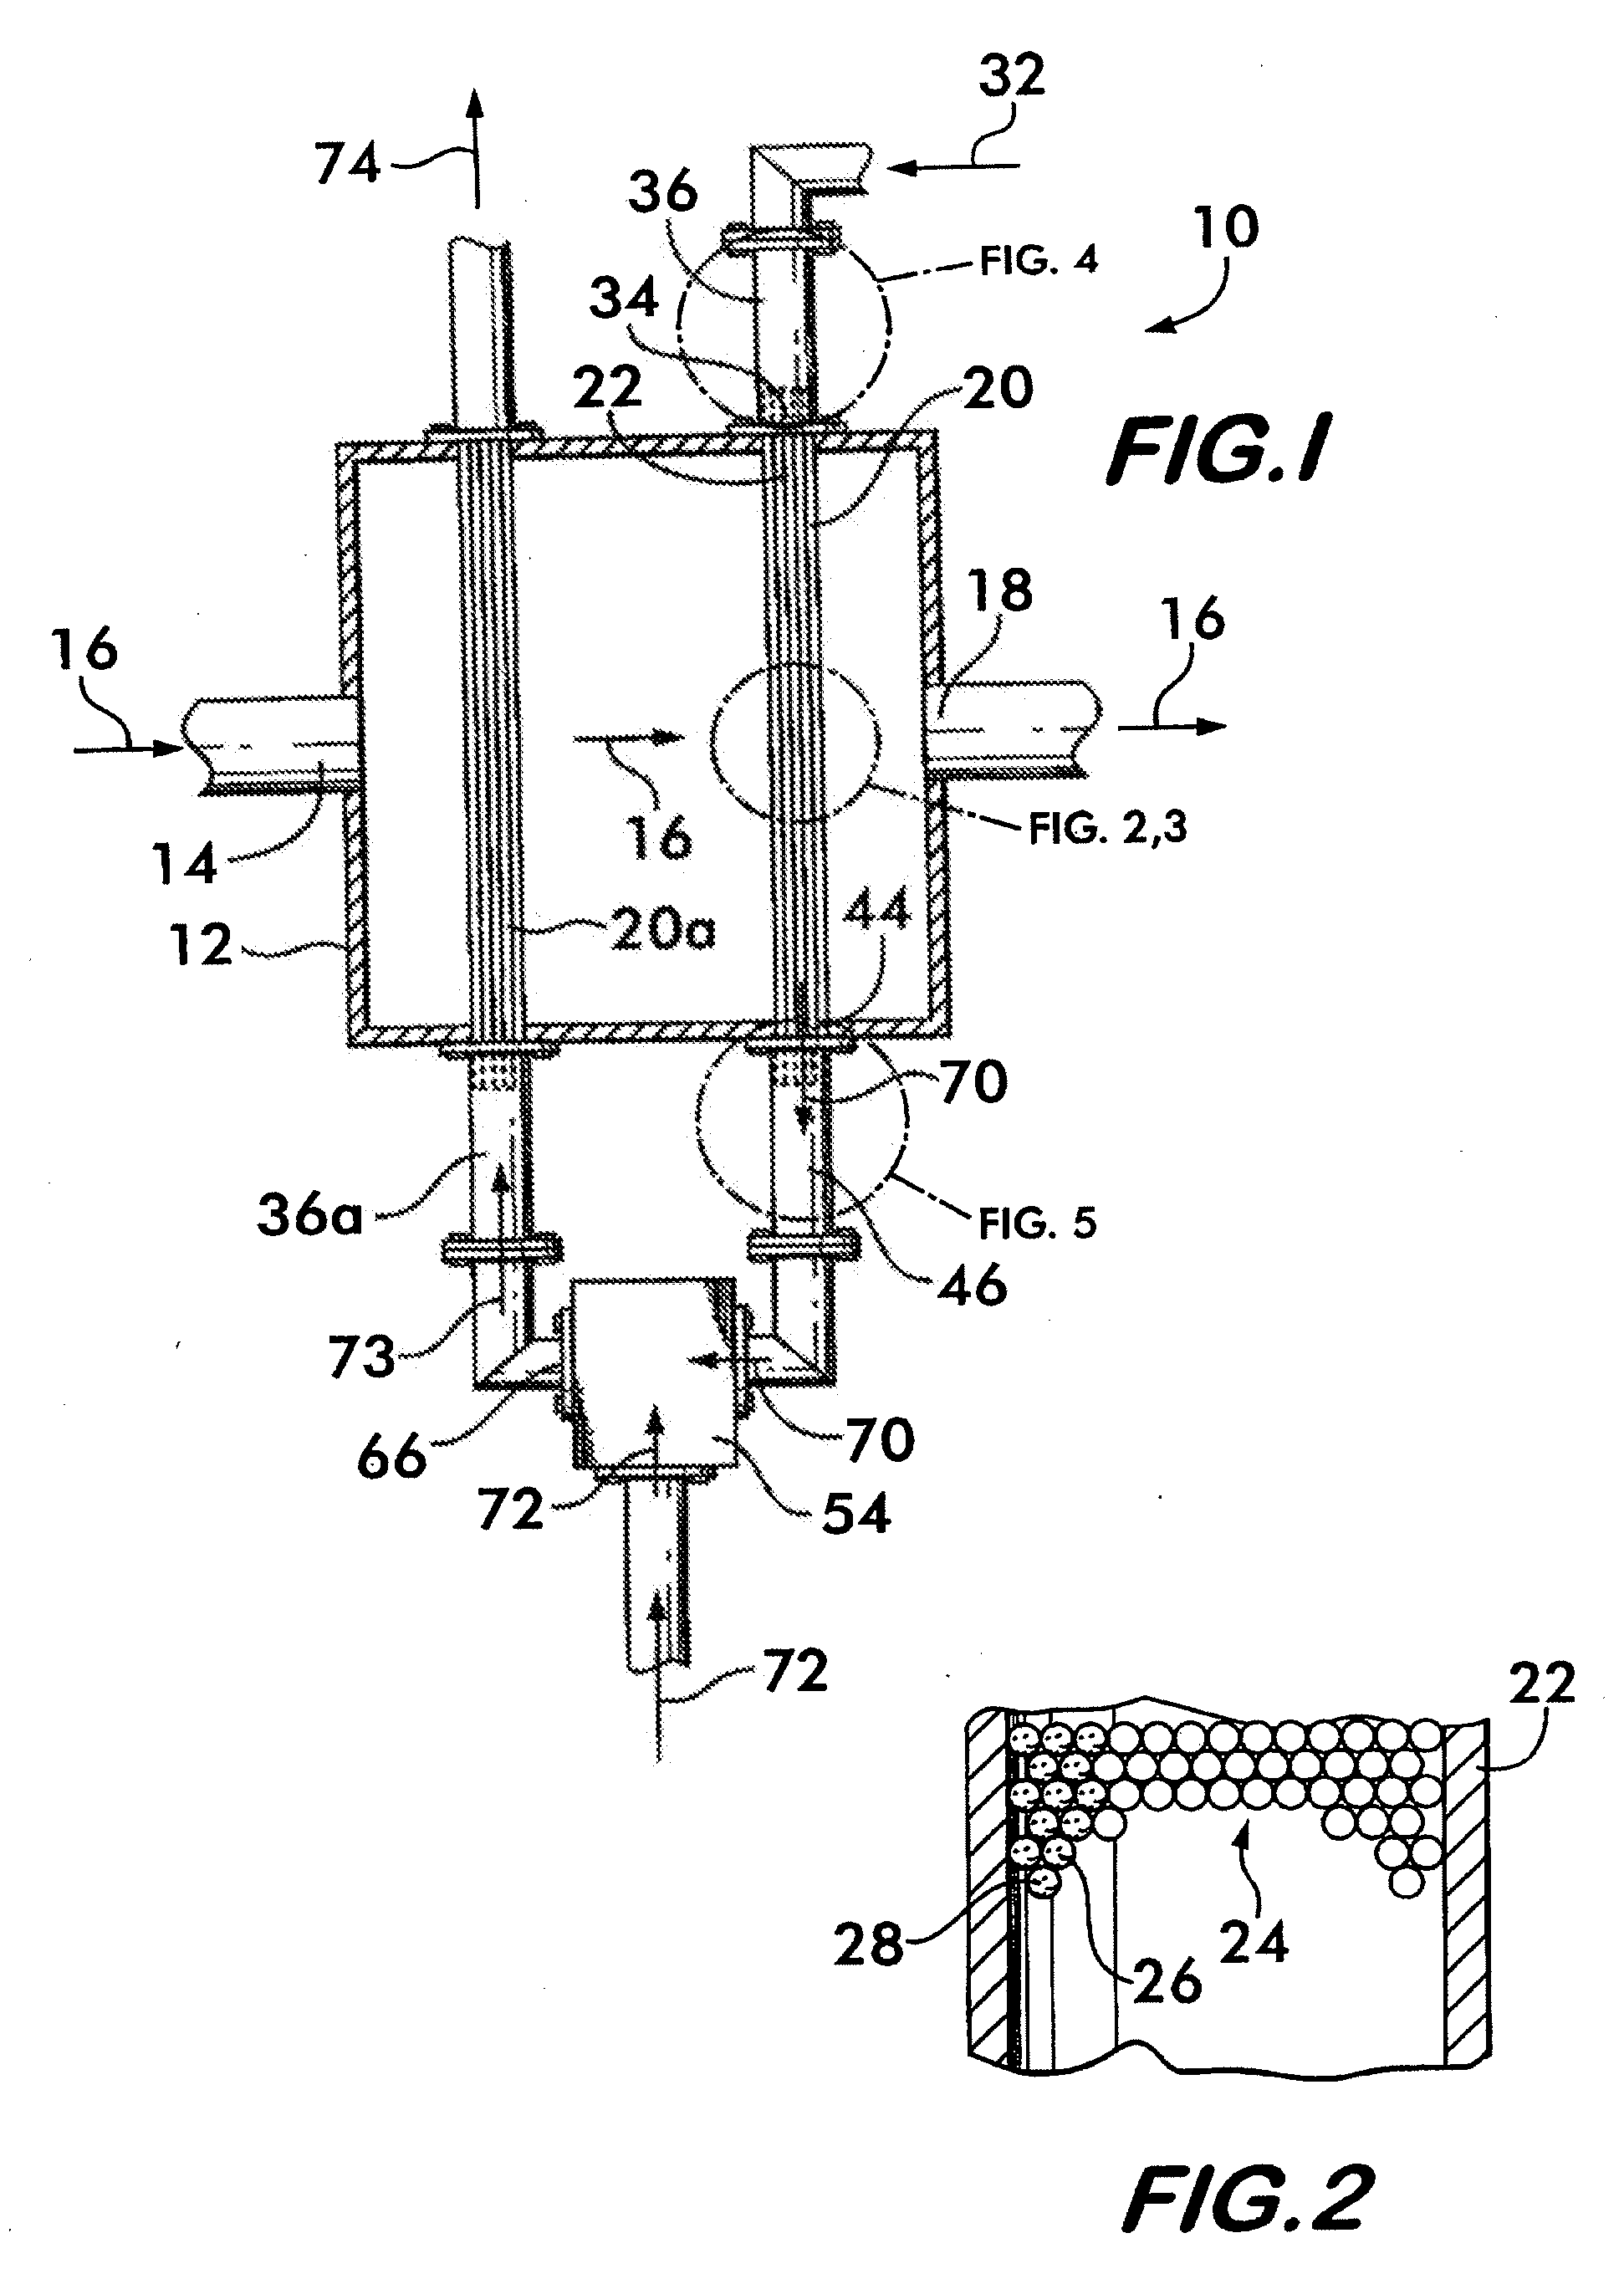 Staged Hydrocarbon/Steam Reformer Apparatus And Method